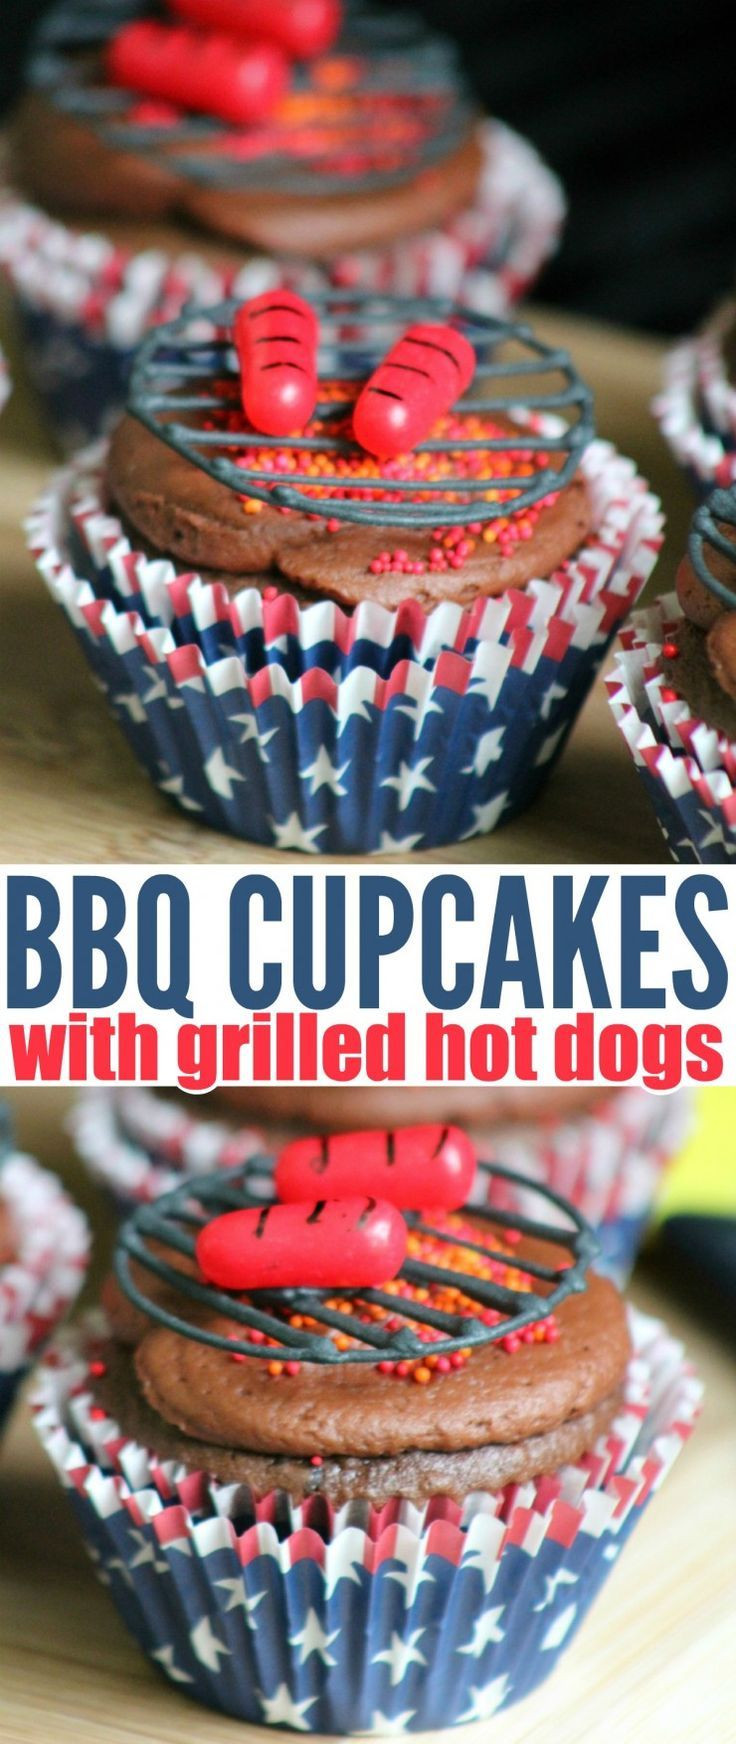 Memorial Day Cupcakes Ideas
 These adorable BBQ Cupcakes with Grilled Hot Dogs really